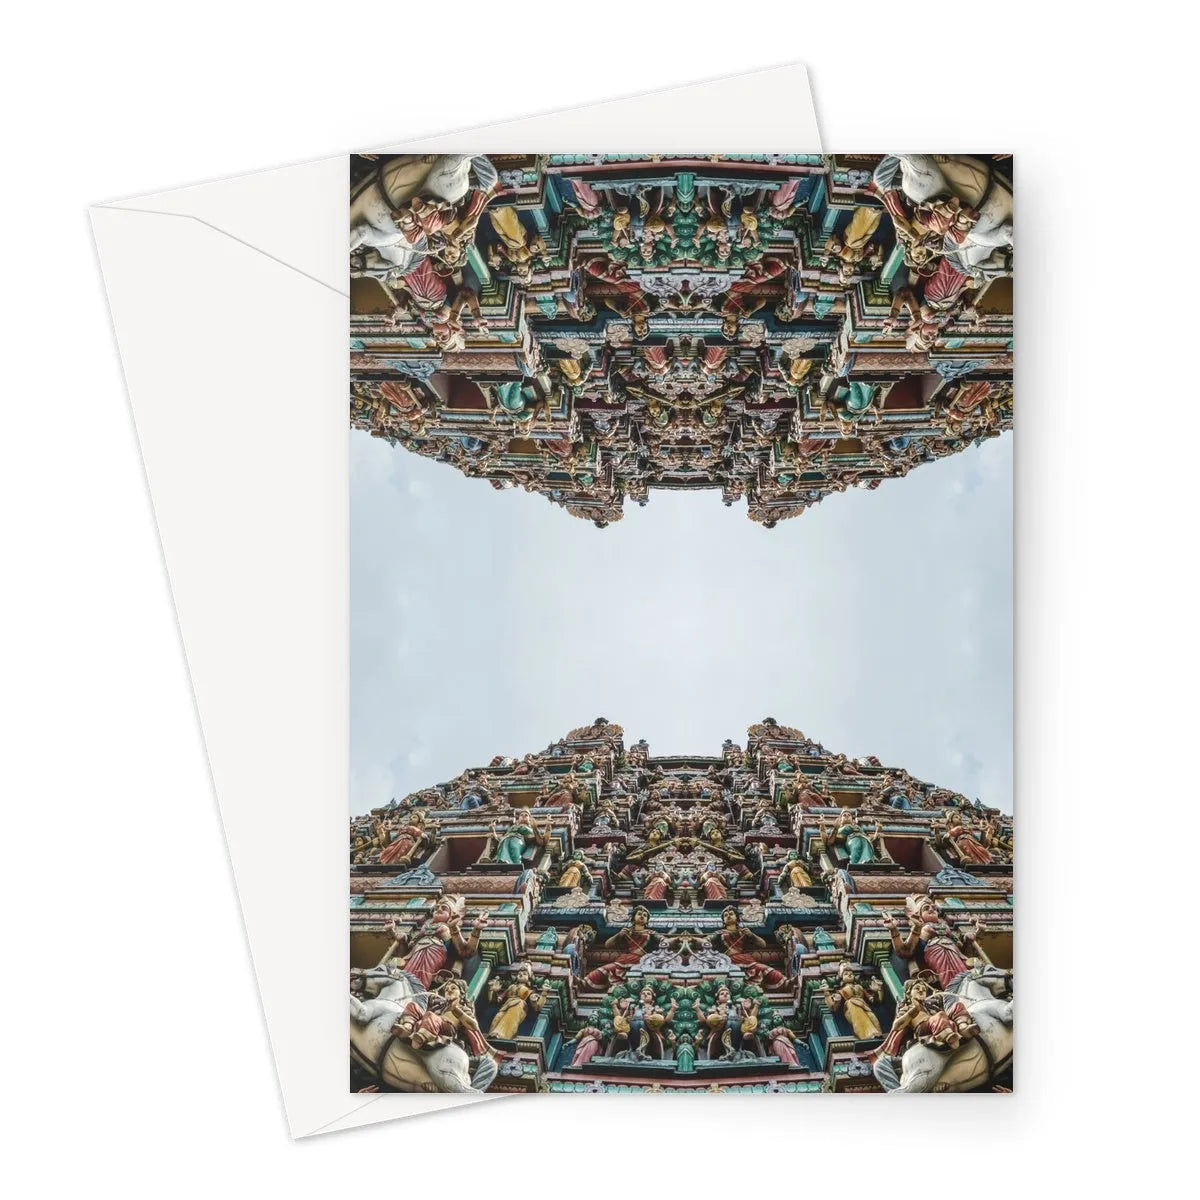 Every Deity Greeting Card - A5 Portrait / 1 Card - Greeting & Note Cards - Aesthetic Art